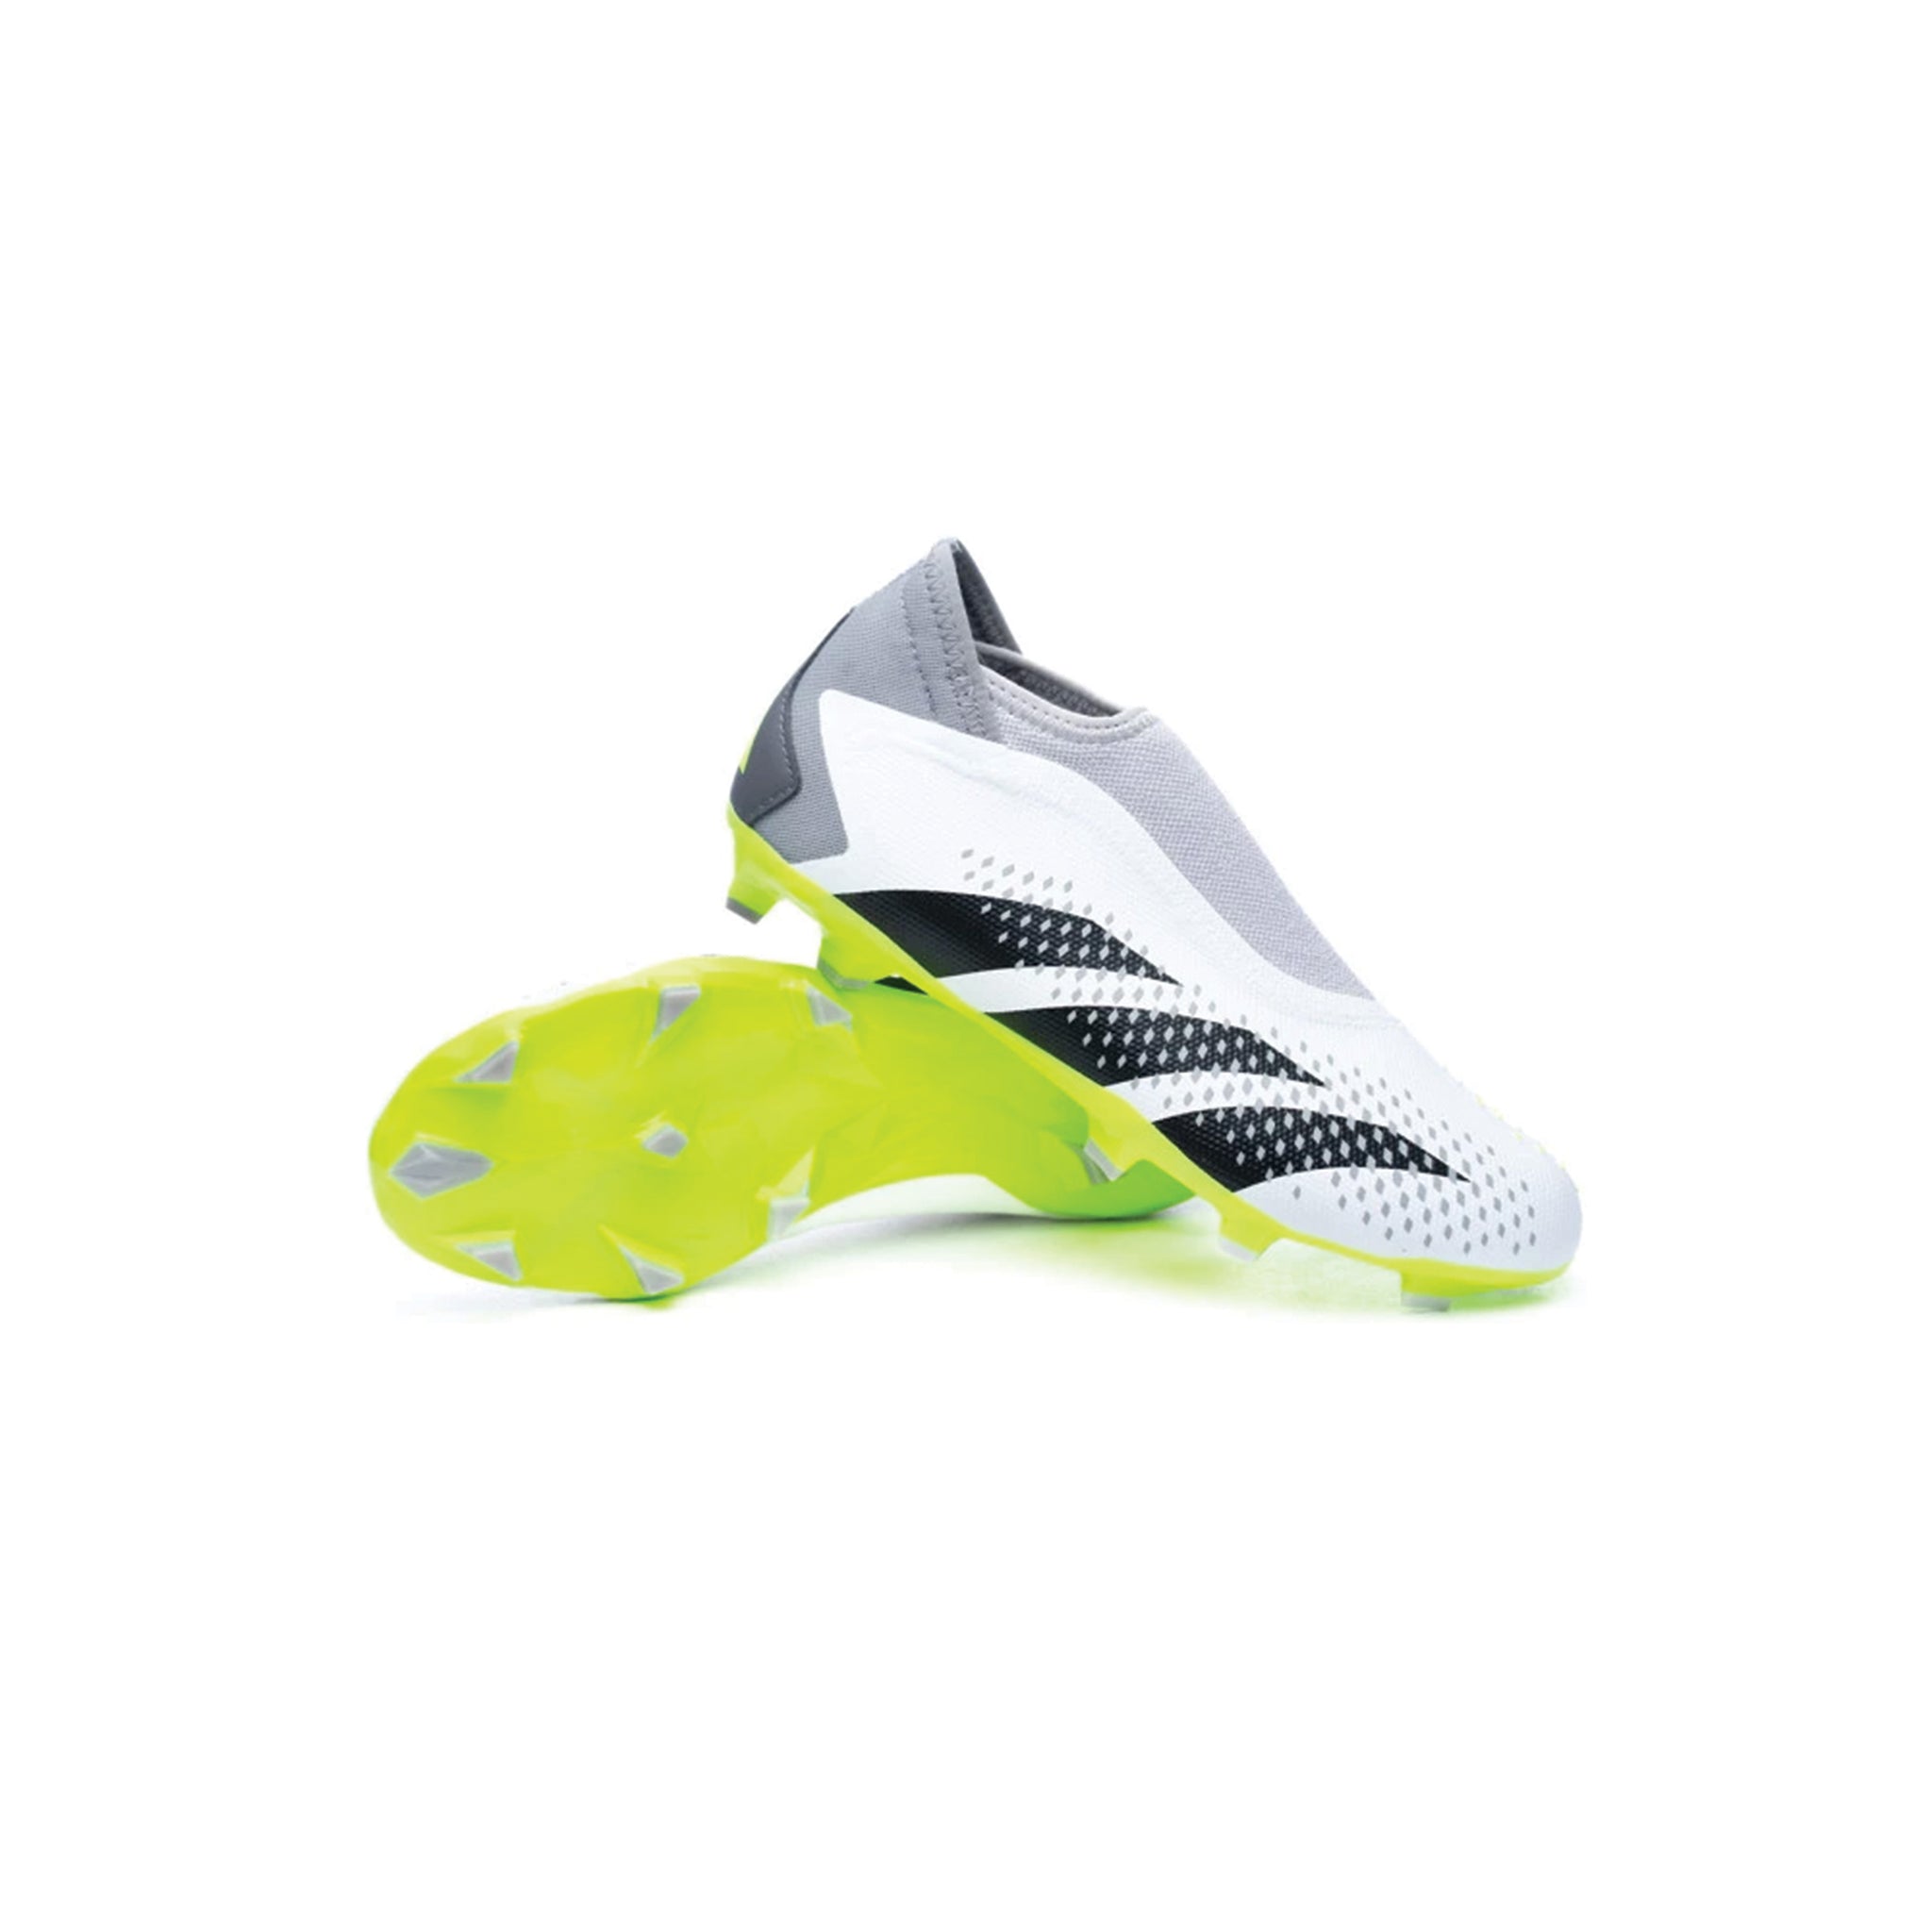 adidas Predator Accuracy.3 Laceless Firm Ground Boots - White